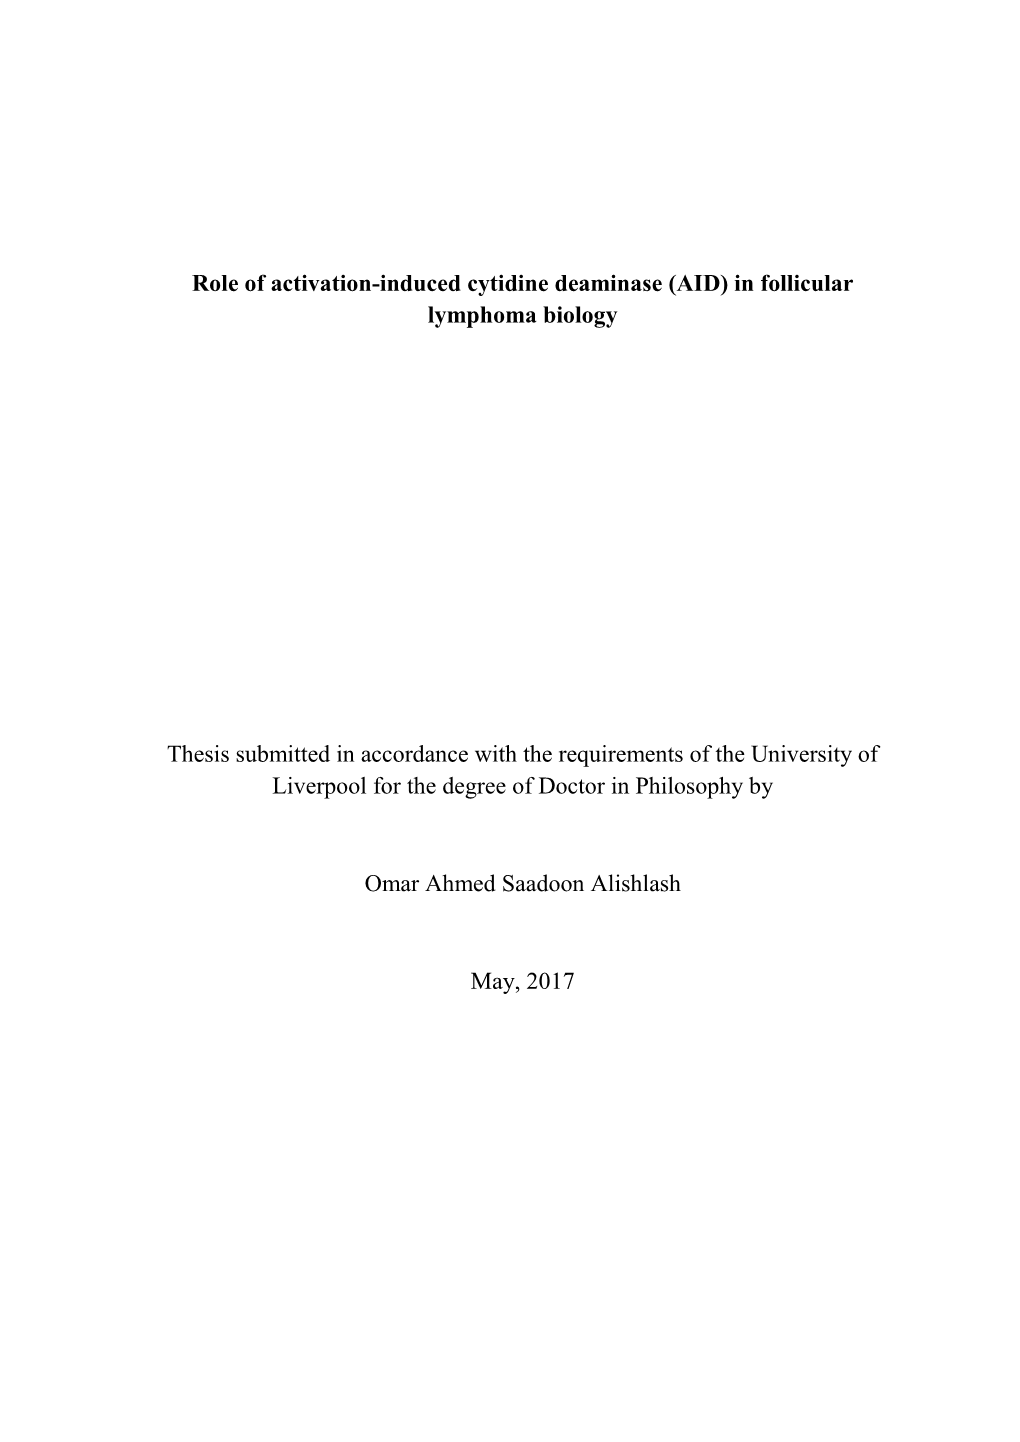 (AID) in Follicular Lymphoma Biology Thesis Submitted in Accordance